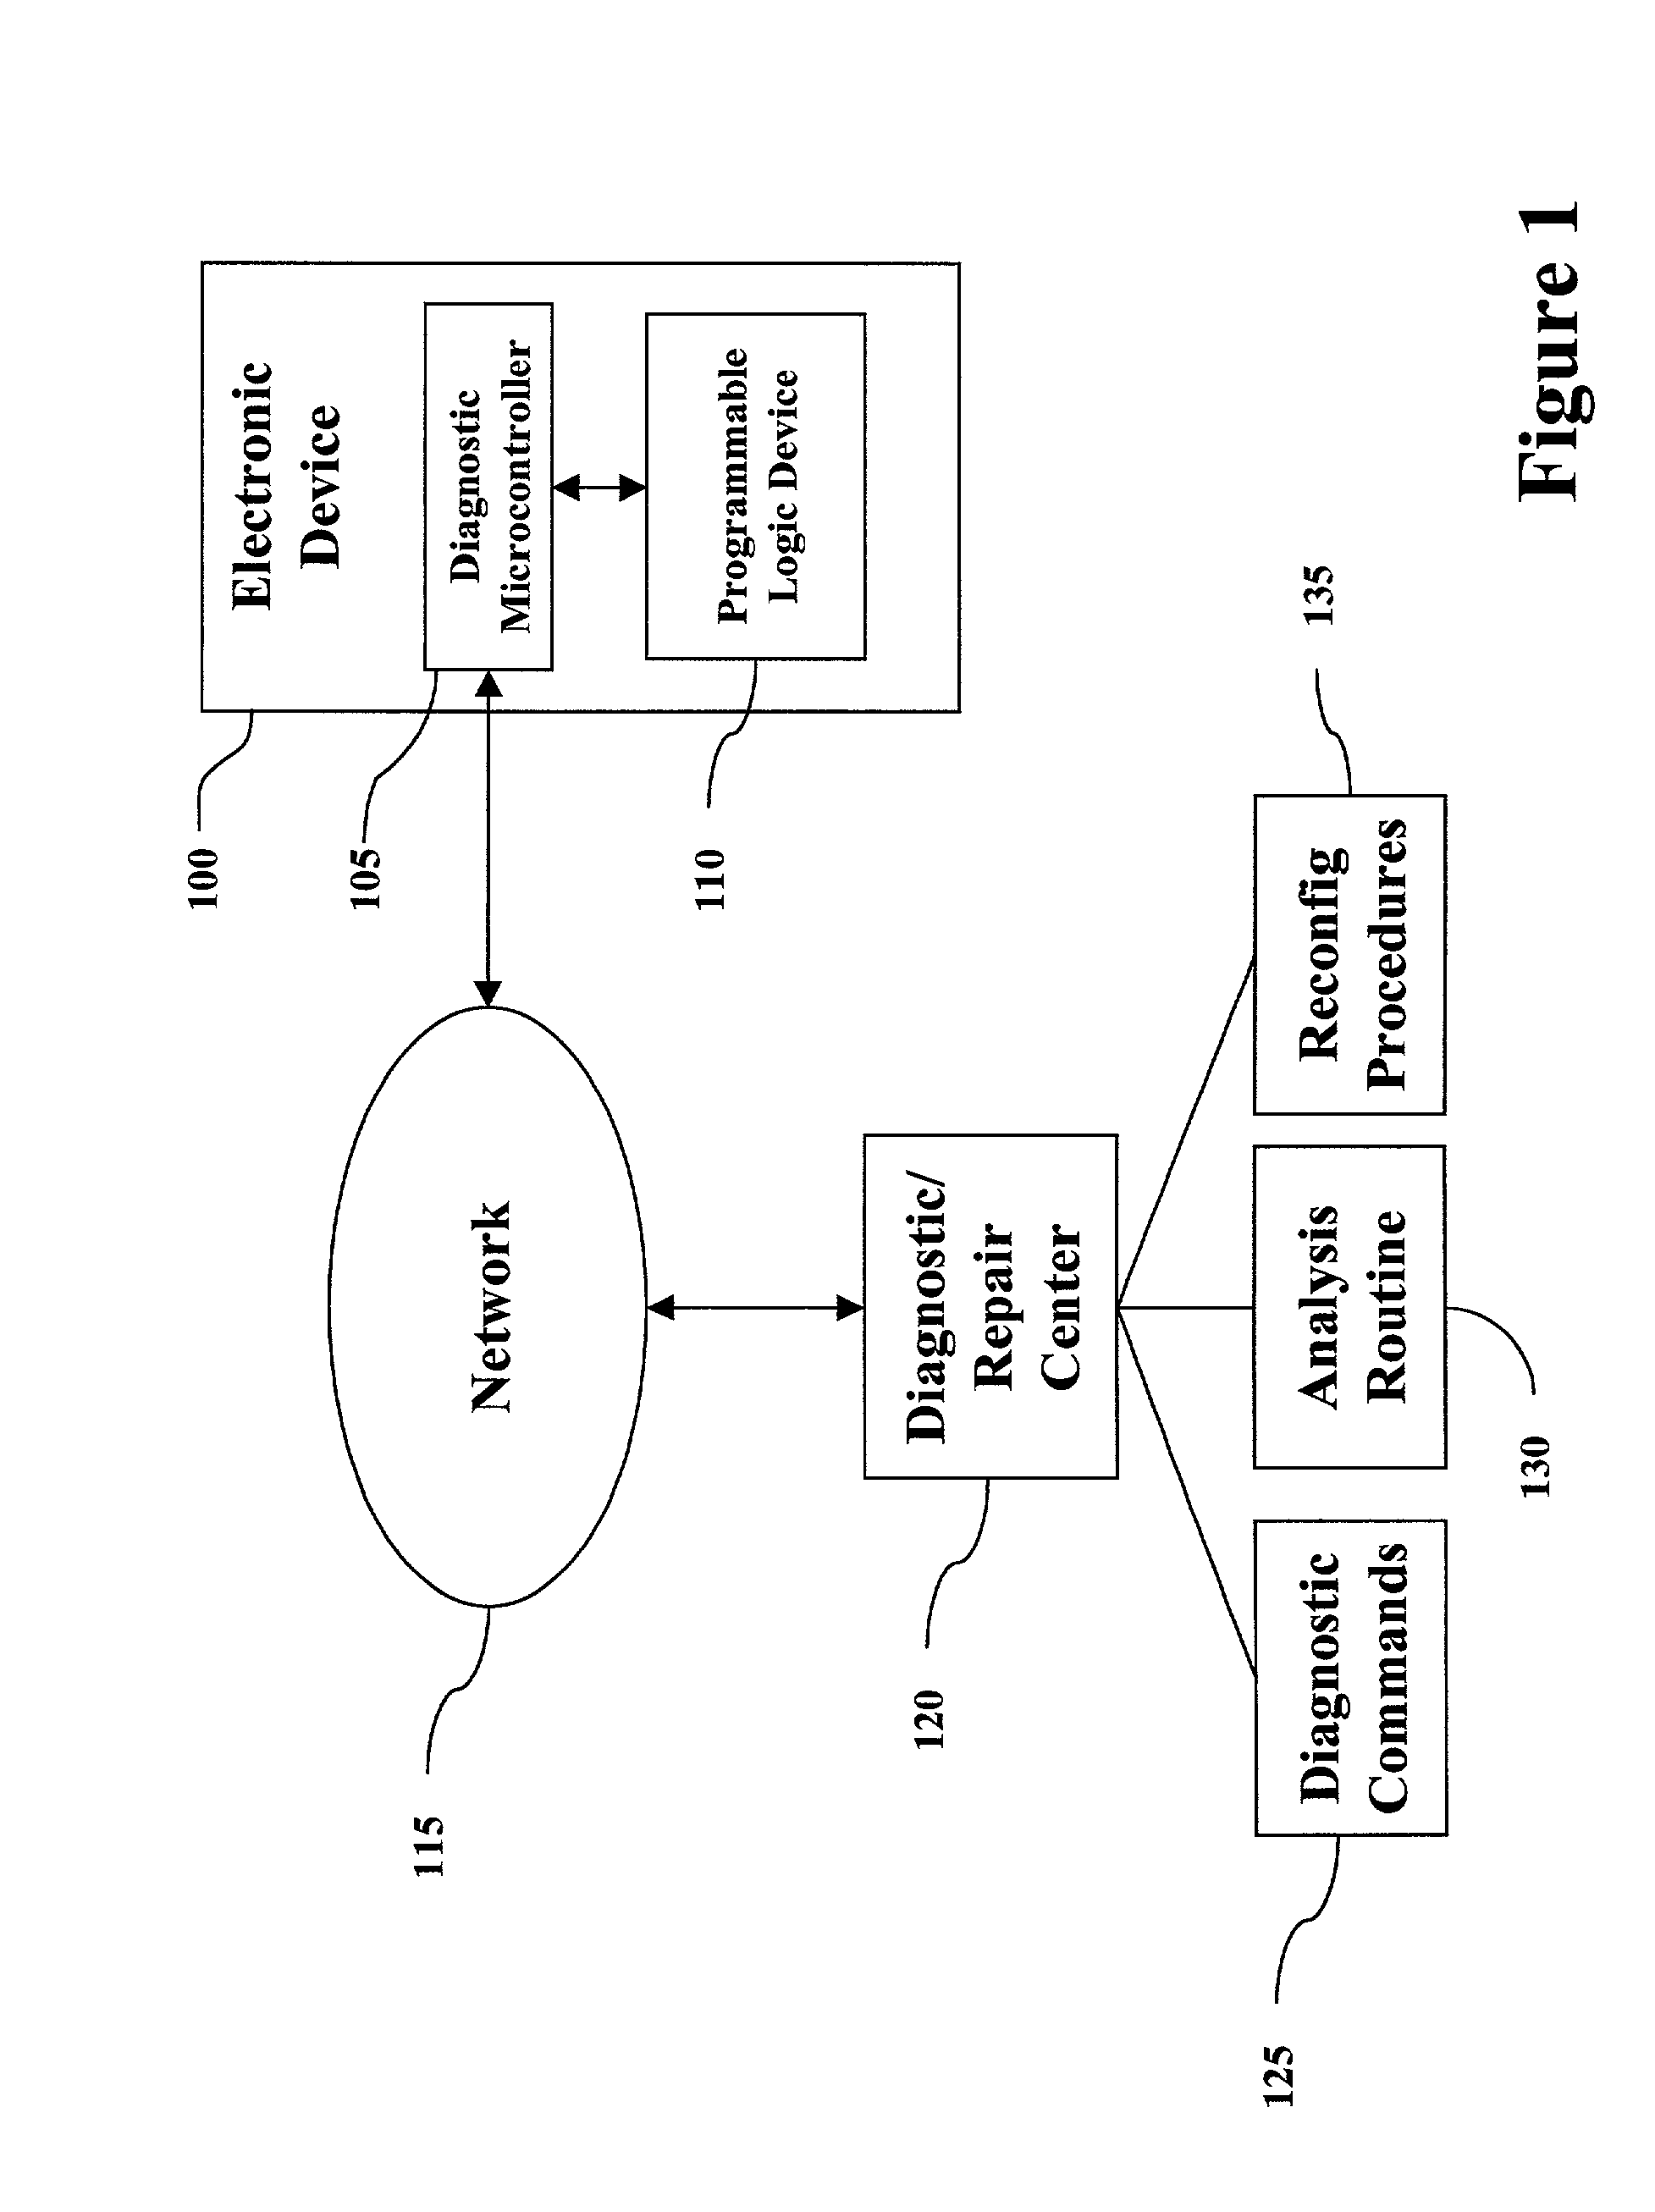 Network based diagnostic system and method for software reconfigurable systems